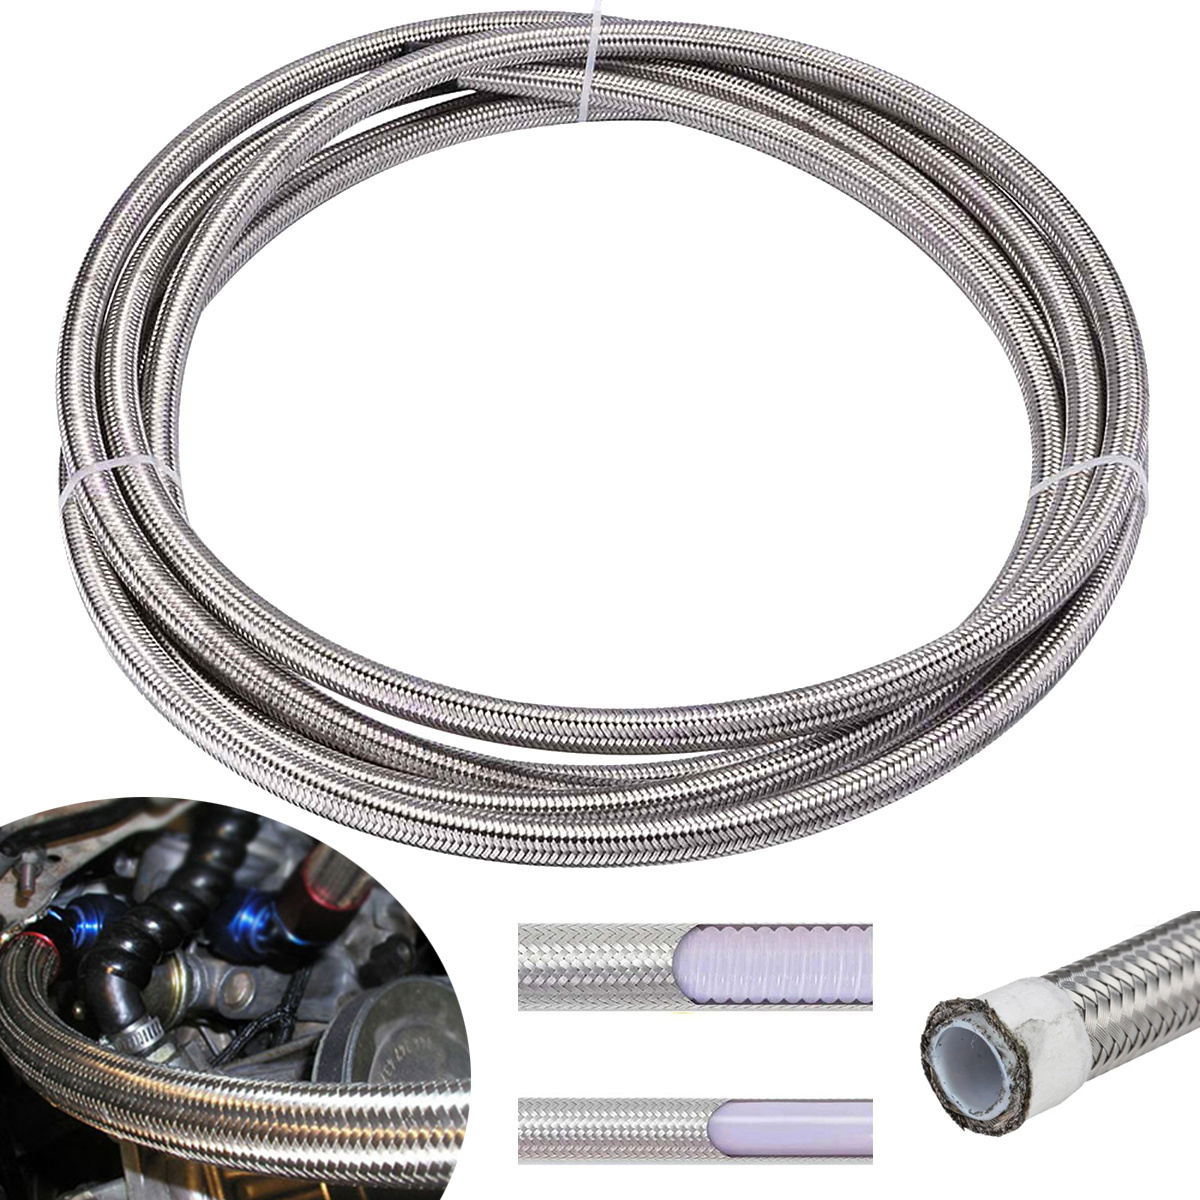 MOJTBE 12FT 6AN Fuel Line Hose AN6 38 Silver Stainless India